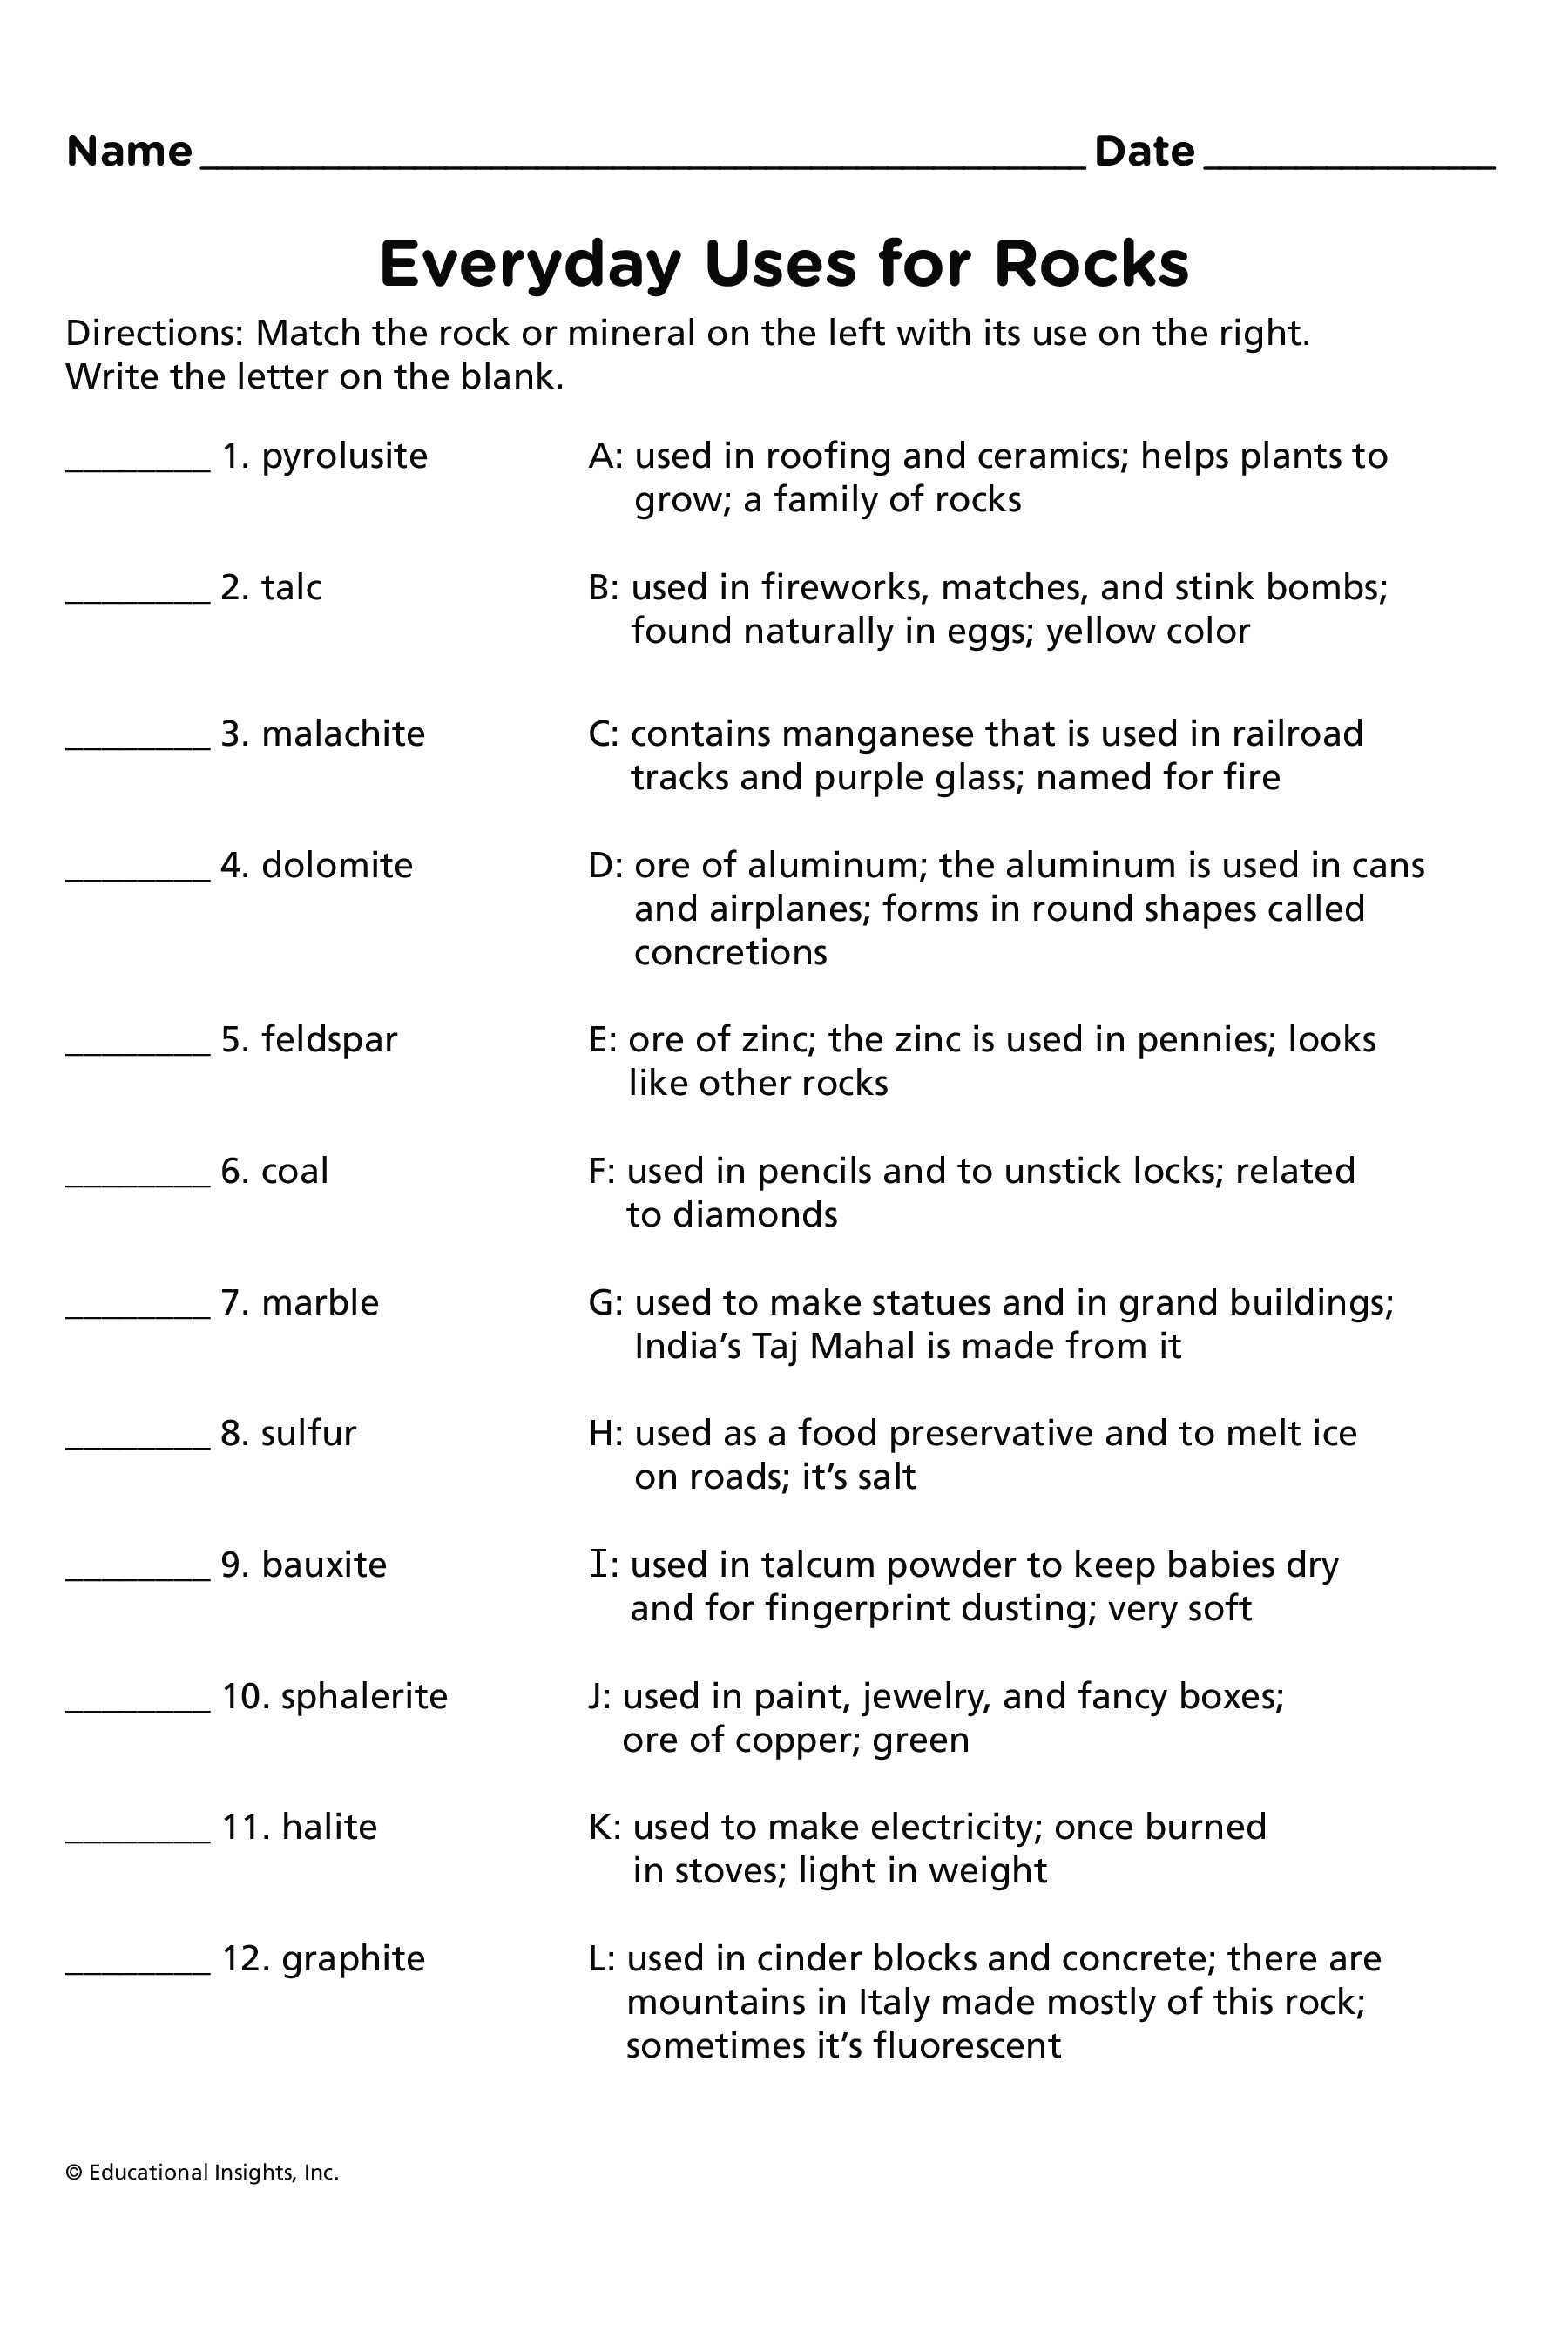 Simple and Compound Interest Worksheet Answers Along with Worksheet Wp Landingpages